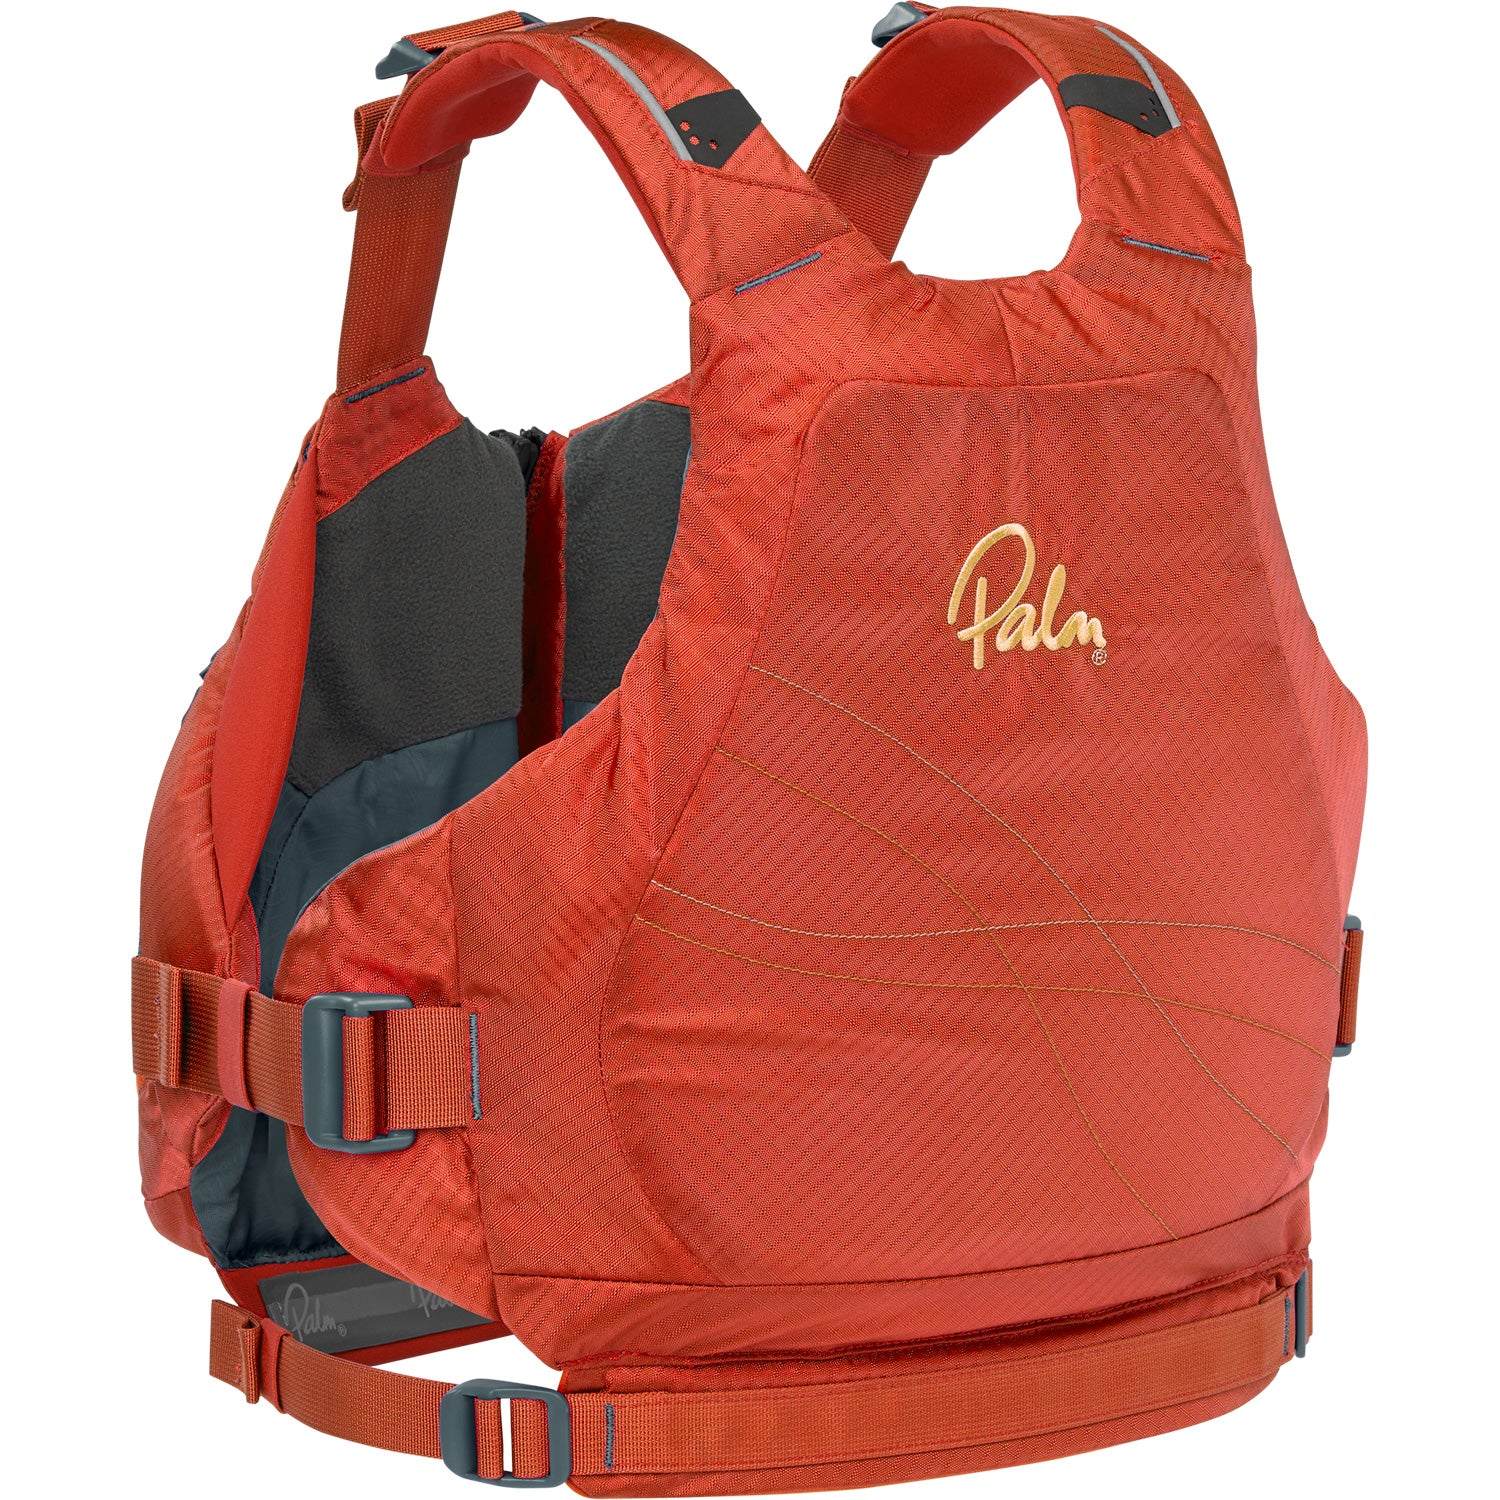 palm's Tangerine coloured PFD for women called the tika from the rear